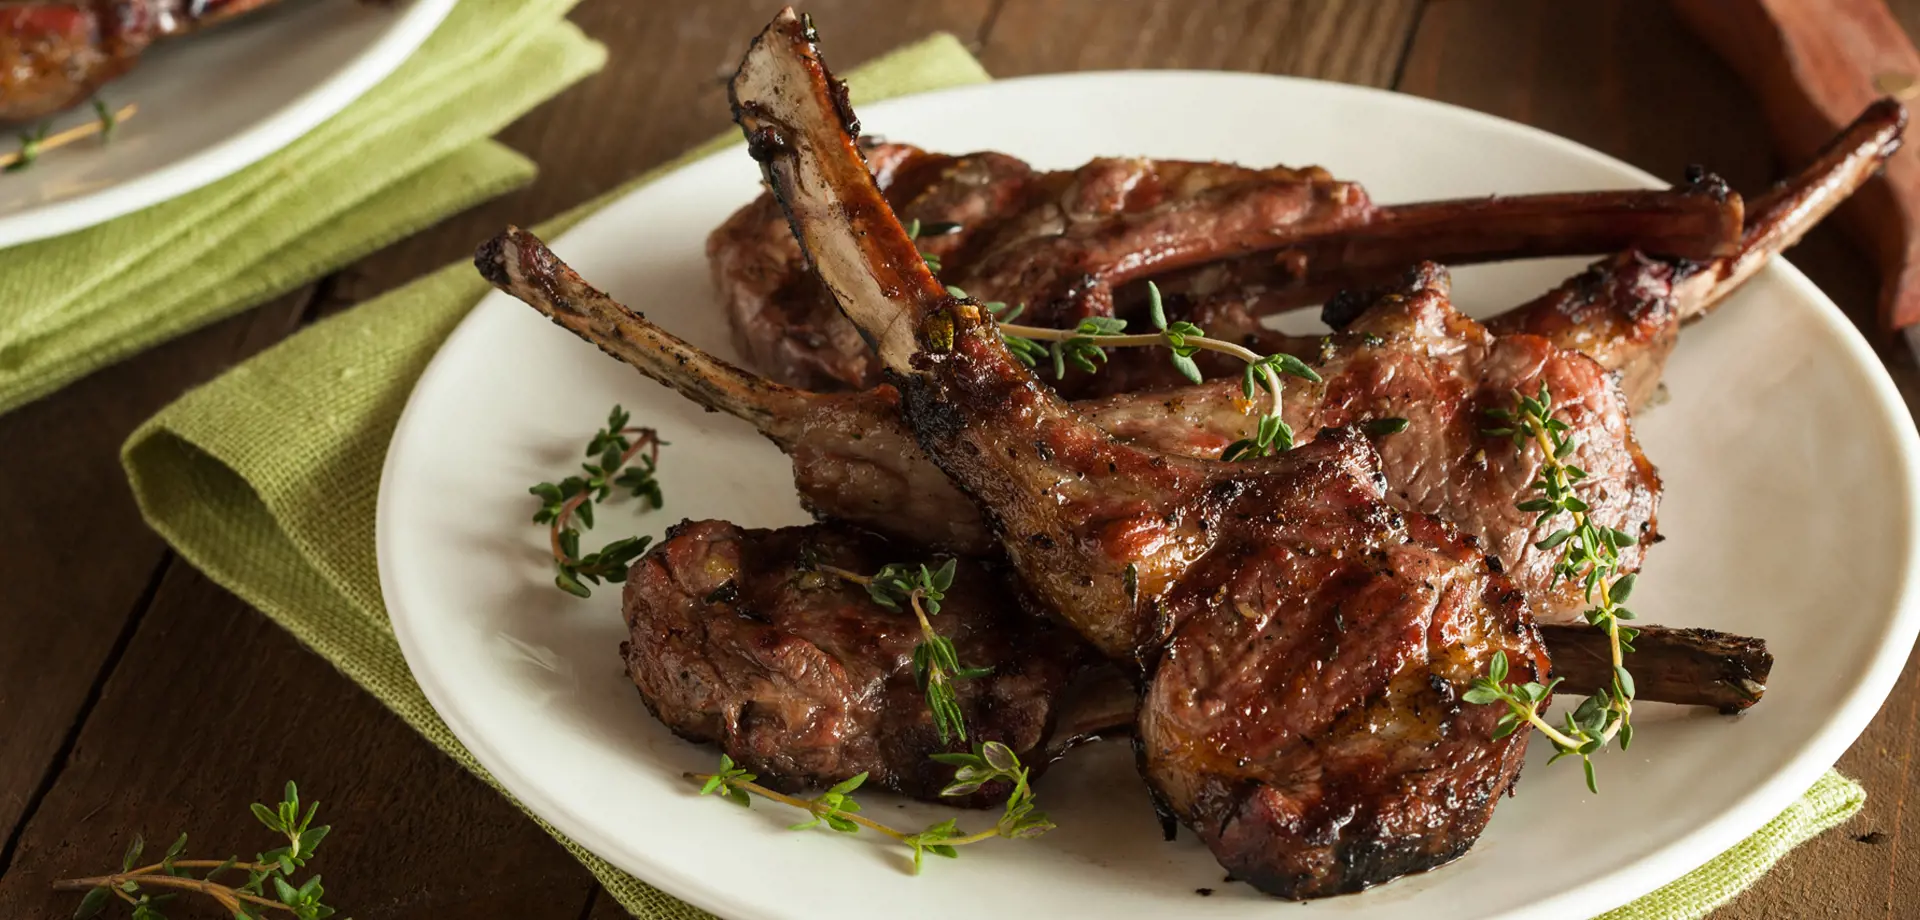 Estate lamb chops with onion and mint puree